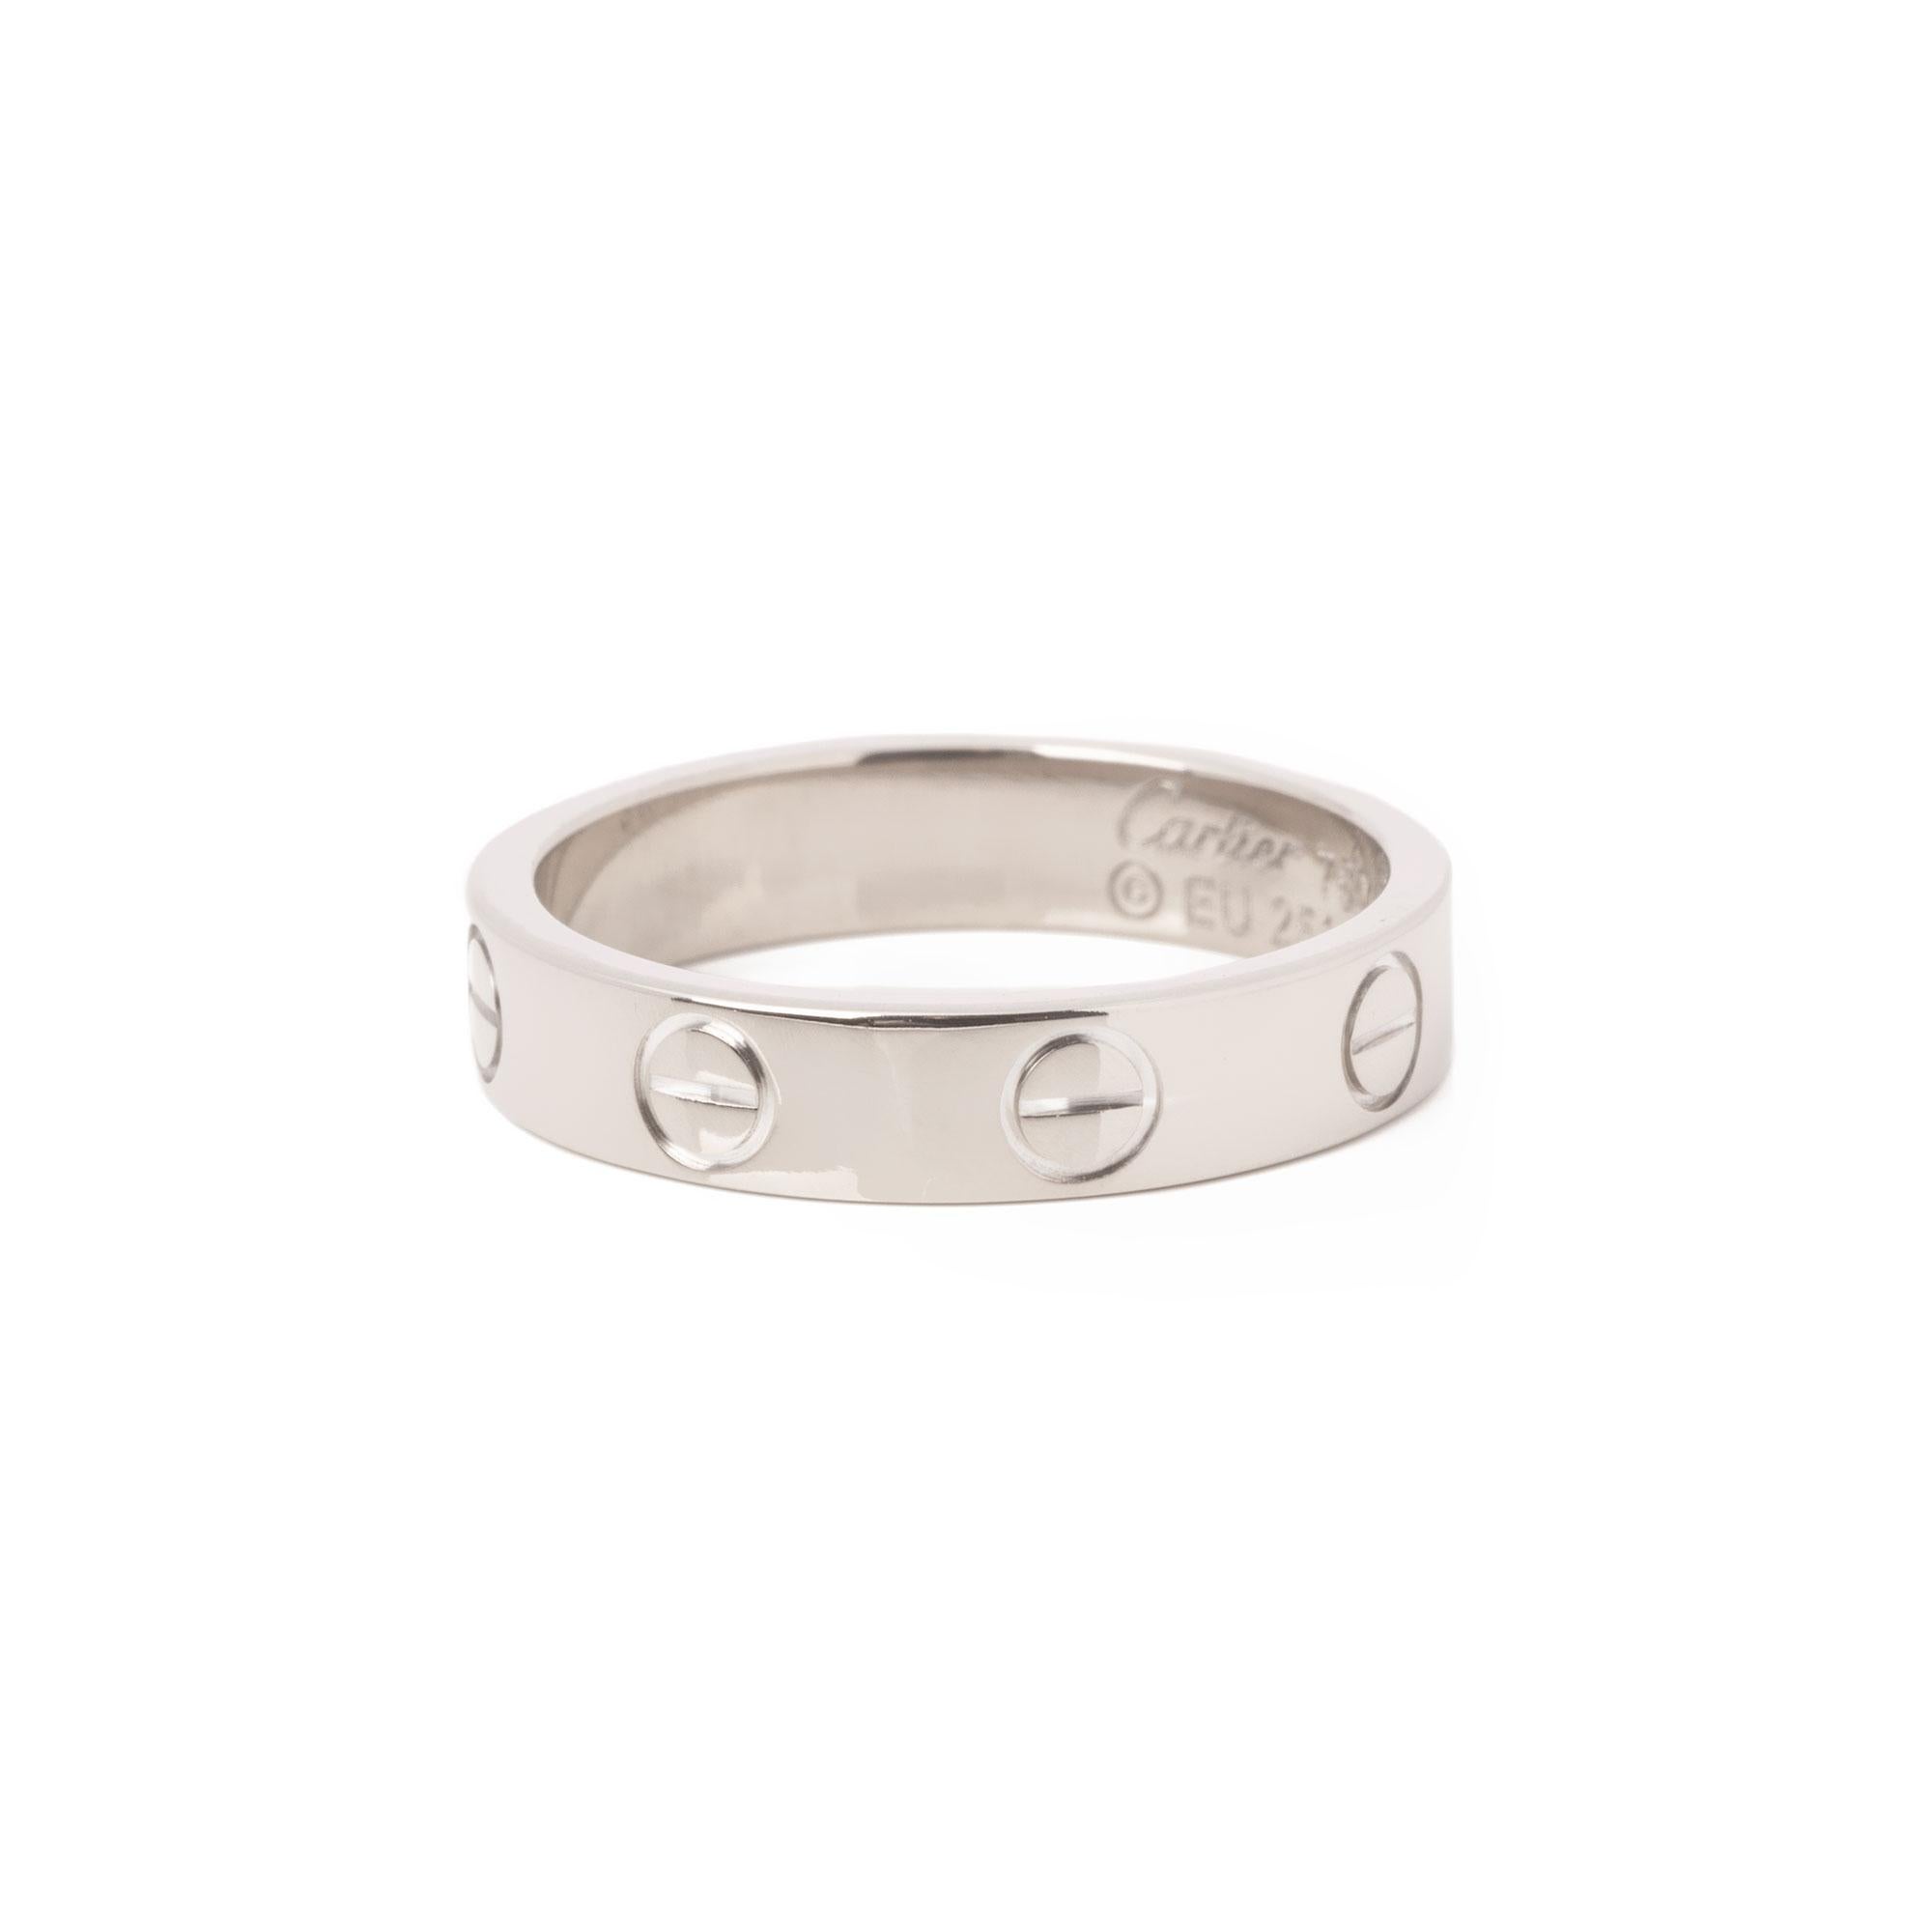 Cartier 18ct White Gold Love Wedding Band Ring

Brand Cartier
Model Love Wedding Band
Product Type Ring
Serial Number EU****
Material(s) 18ct White Gold
UK Ring Size I 1/2
EU Ring Size 48
US Ring Size 4 1/2
Resizing Possible No
Band Width